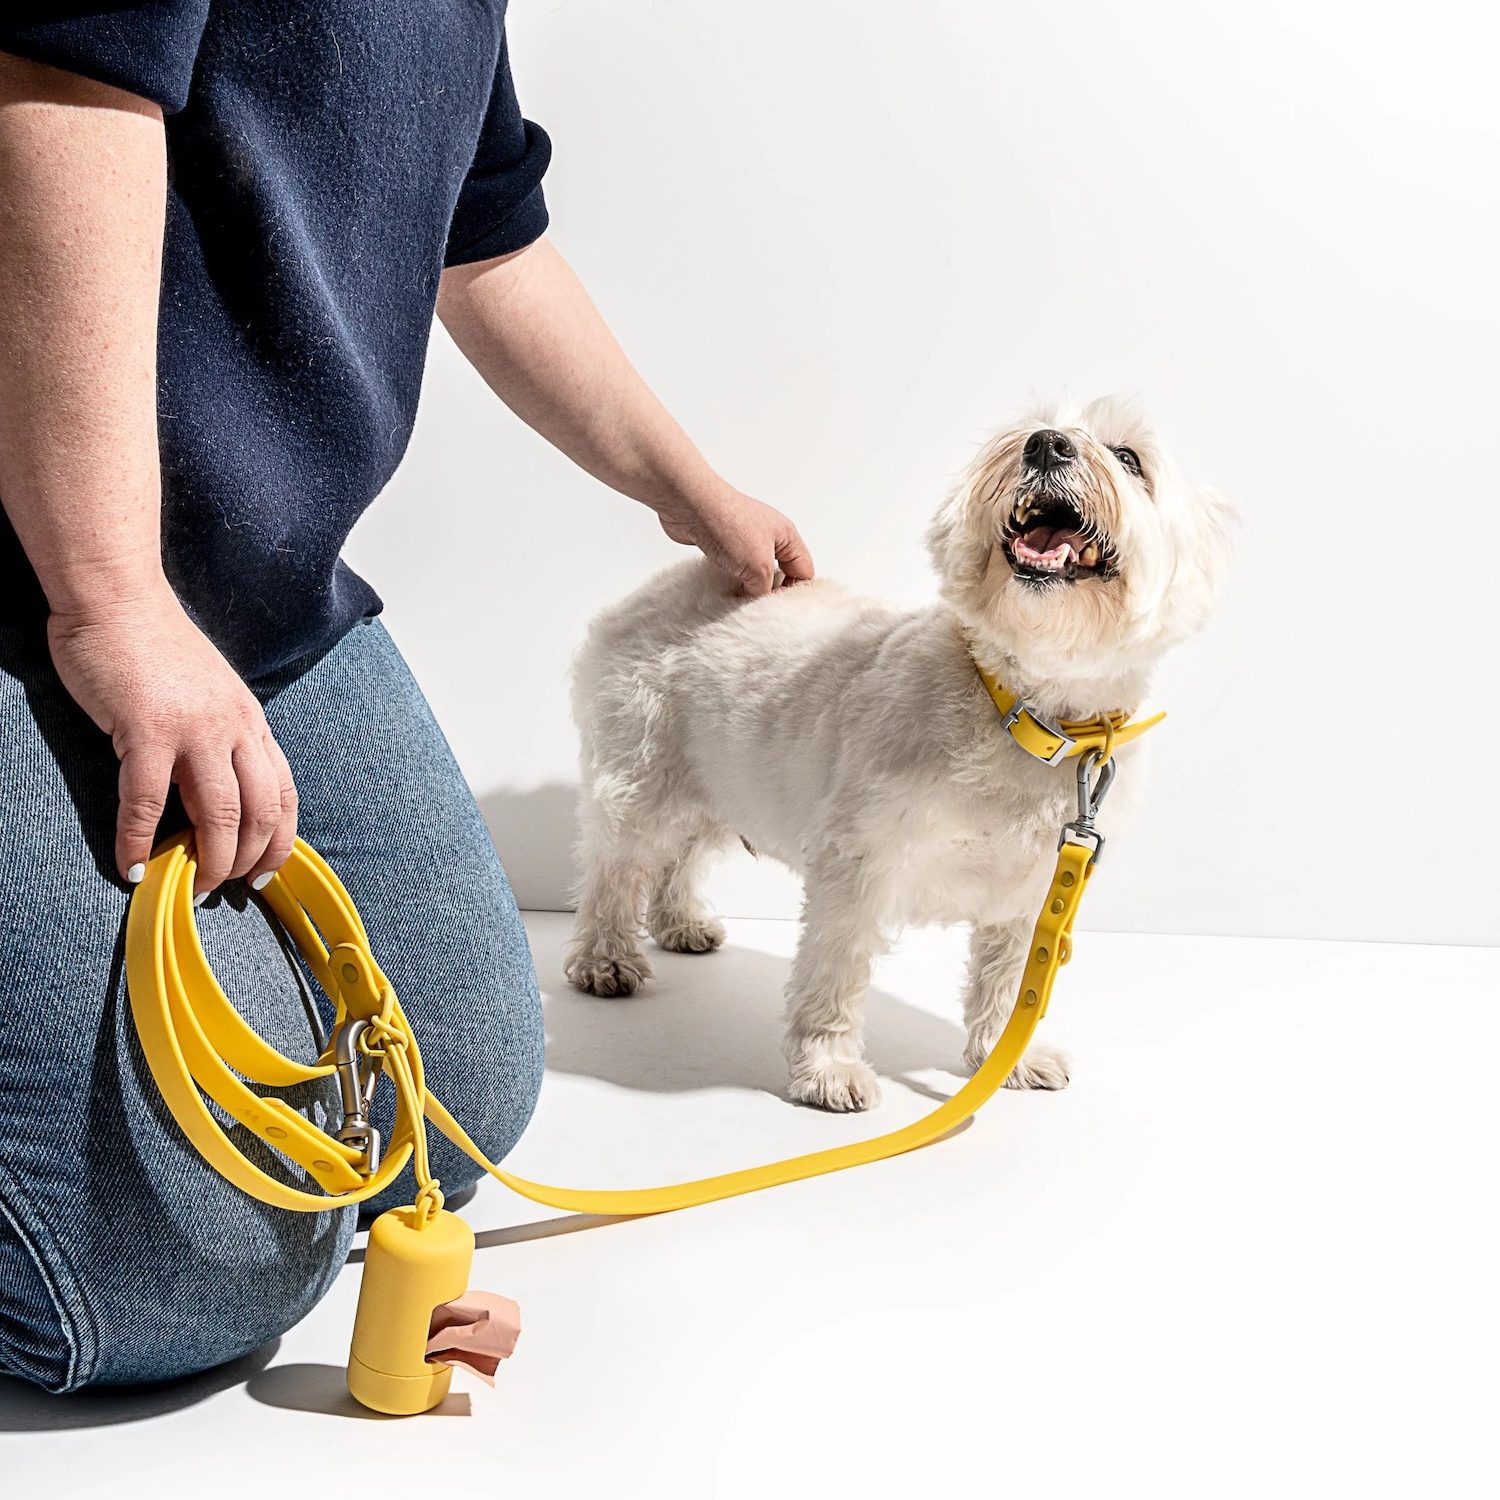 San Diego magazine holiday gift guide item Wild One leash, from Shop Moniker